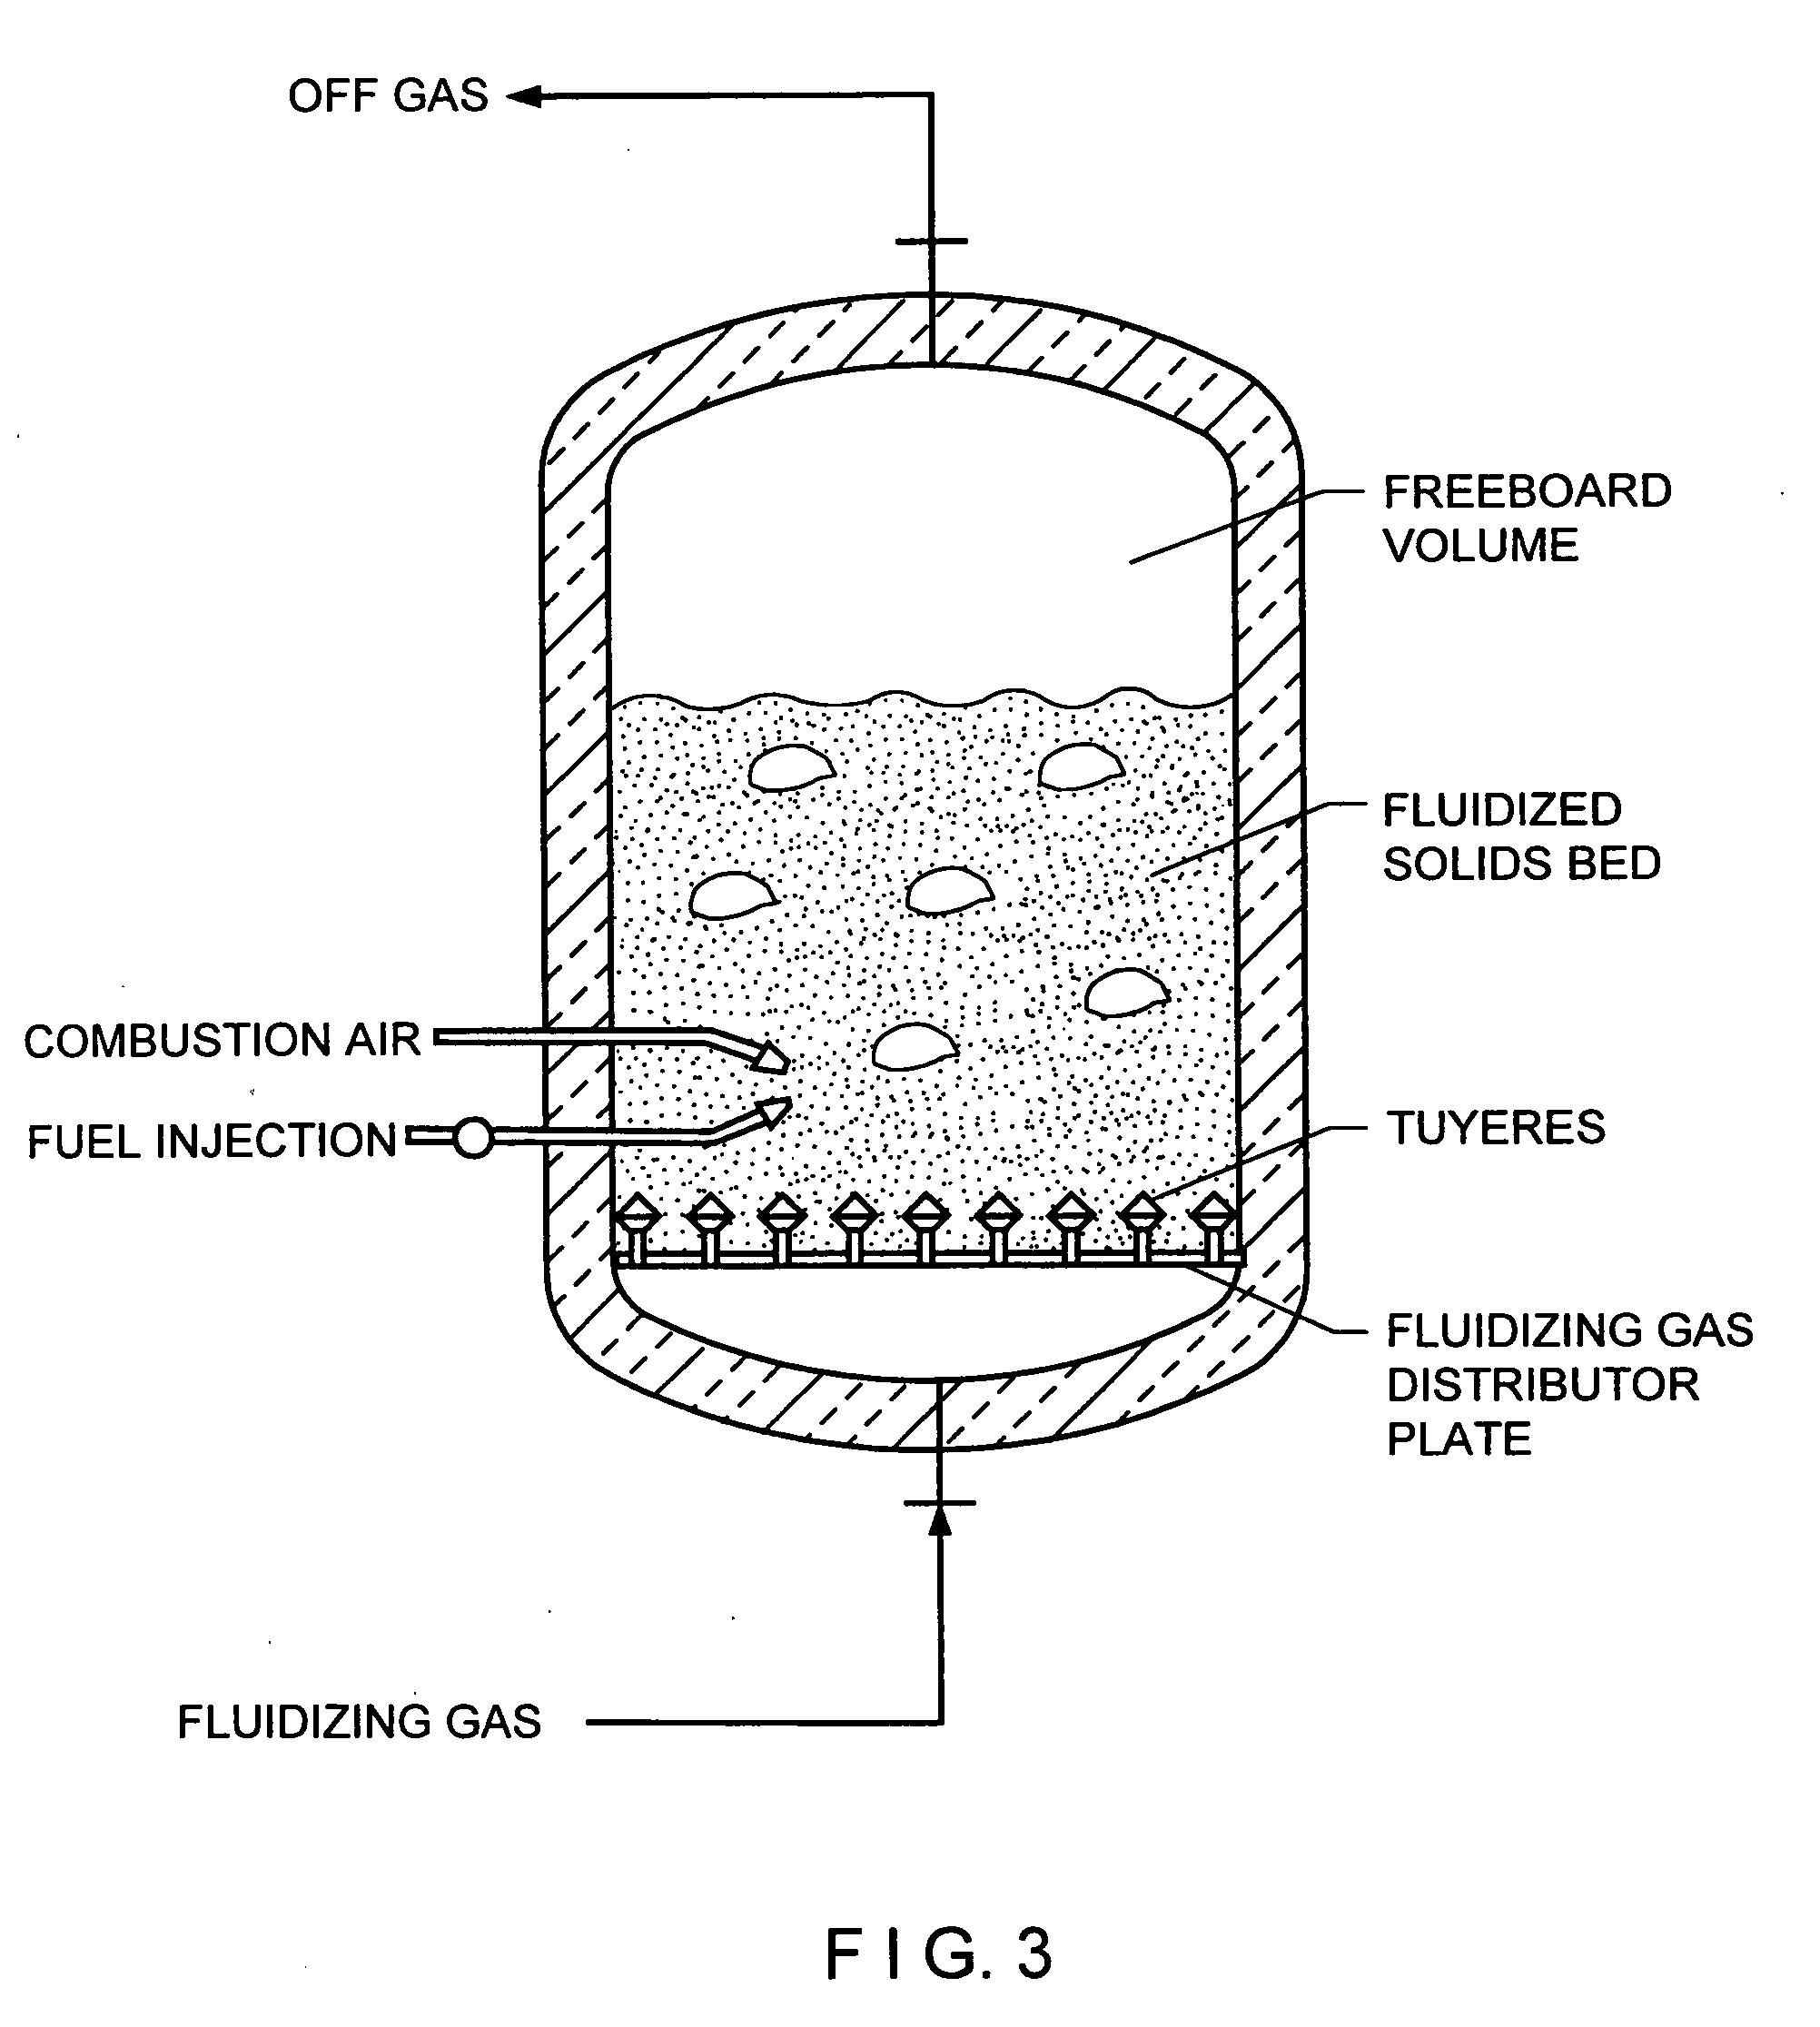 Fluidized bed gas distributor system for elevated temperature operation